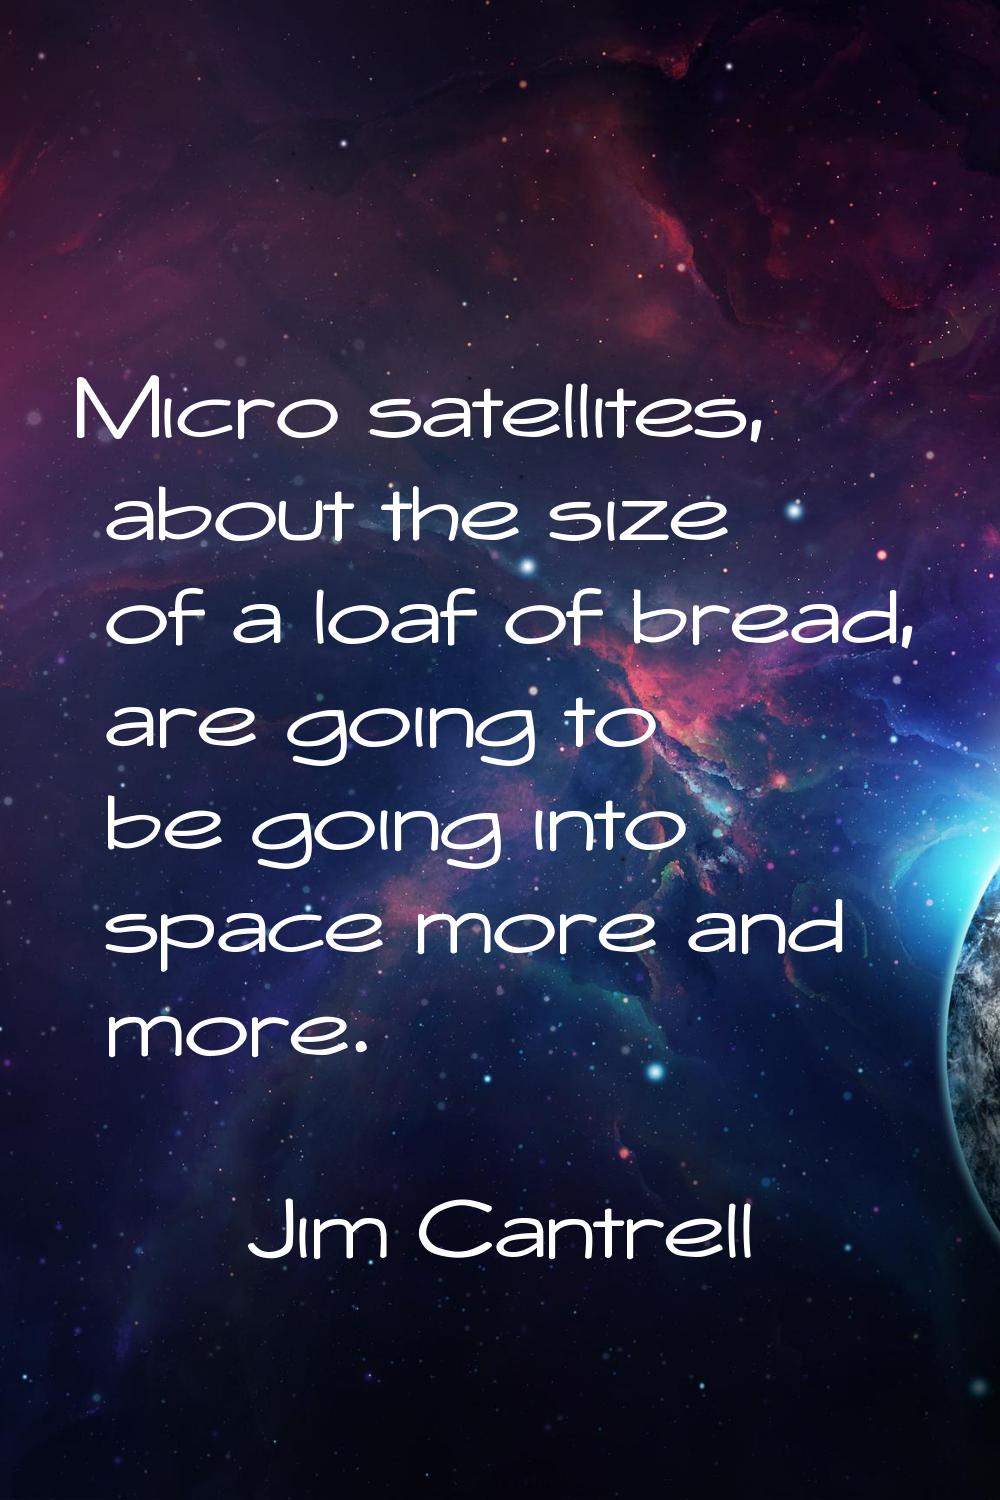 Micro satellites, about the size of a loaf of bread, are going to be going into space more and more